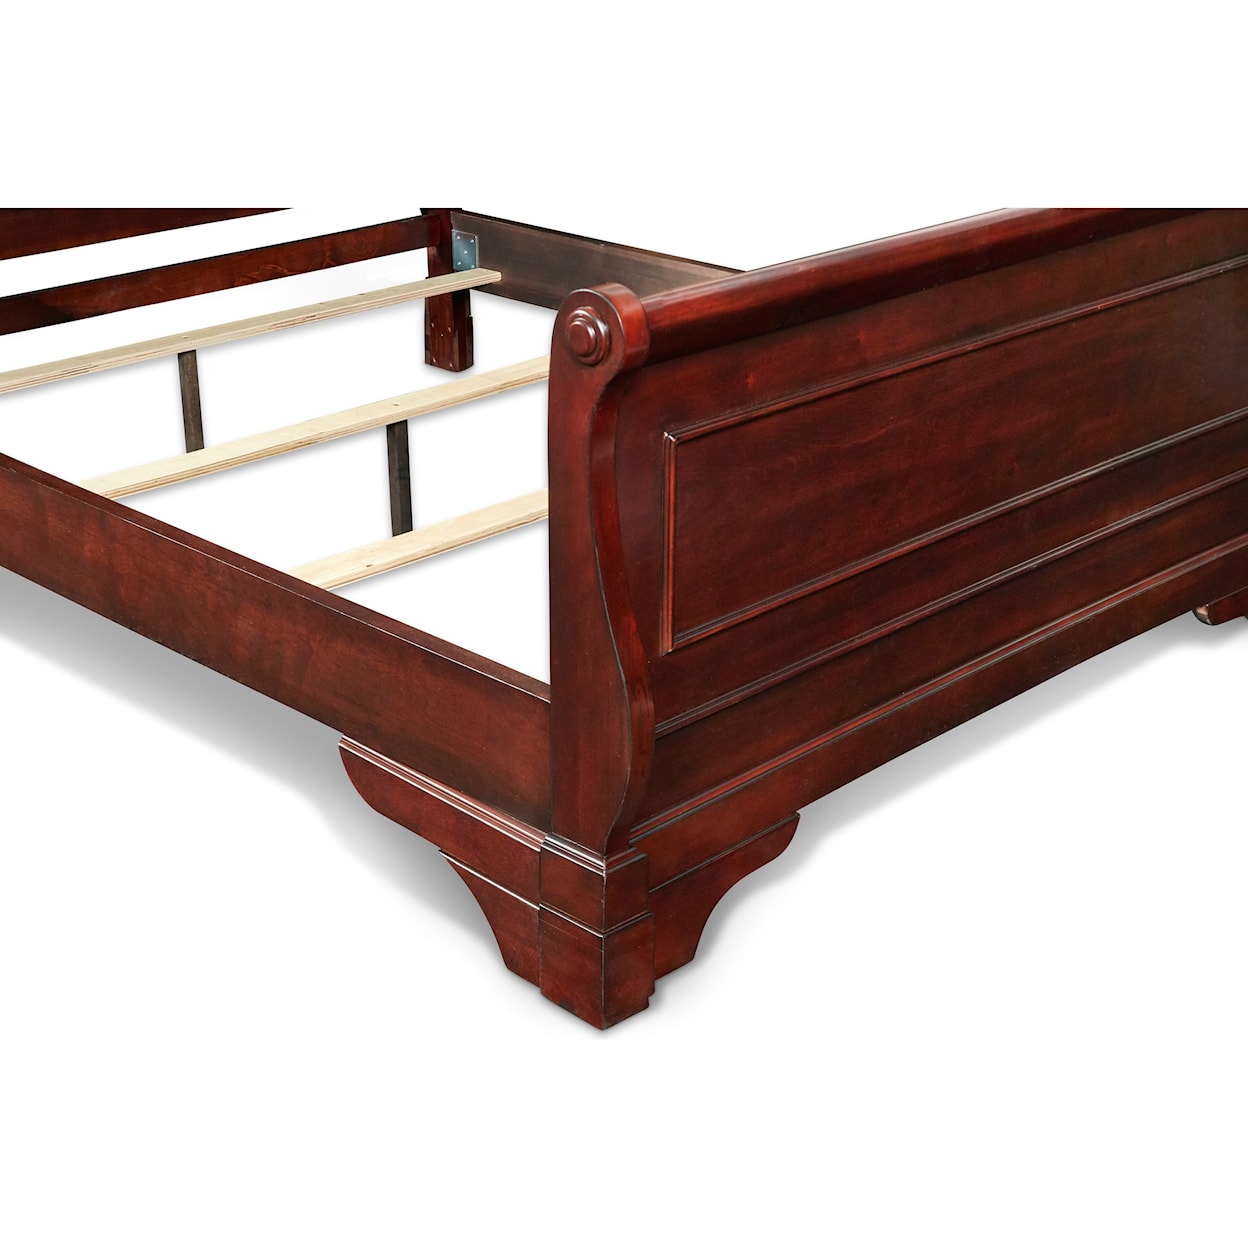 New Classic Versaille California King Sleigh Bed